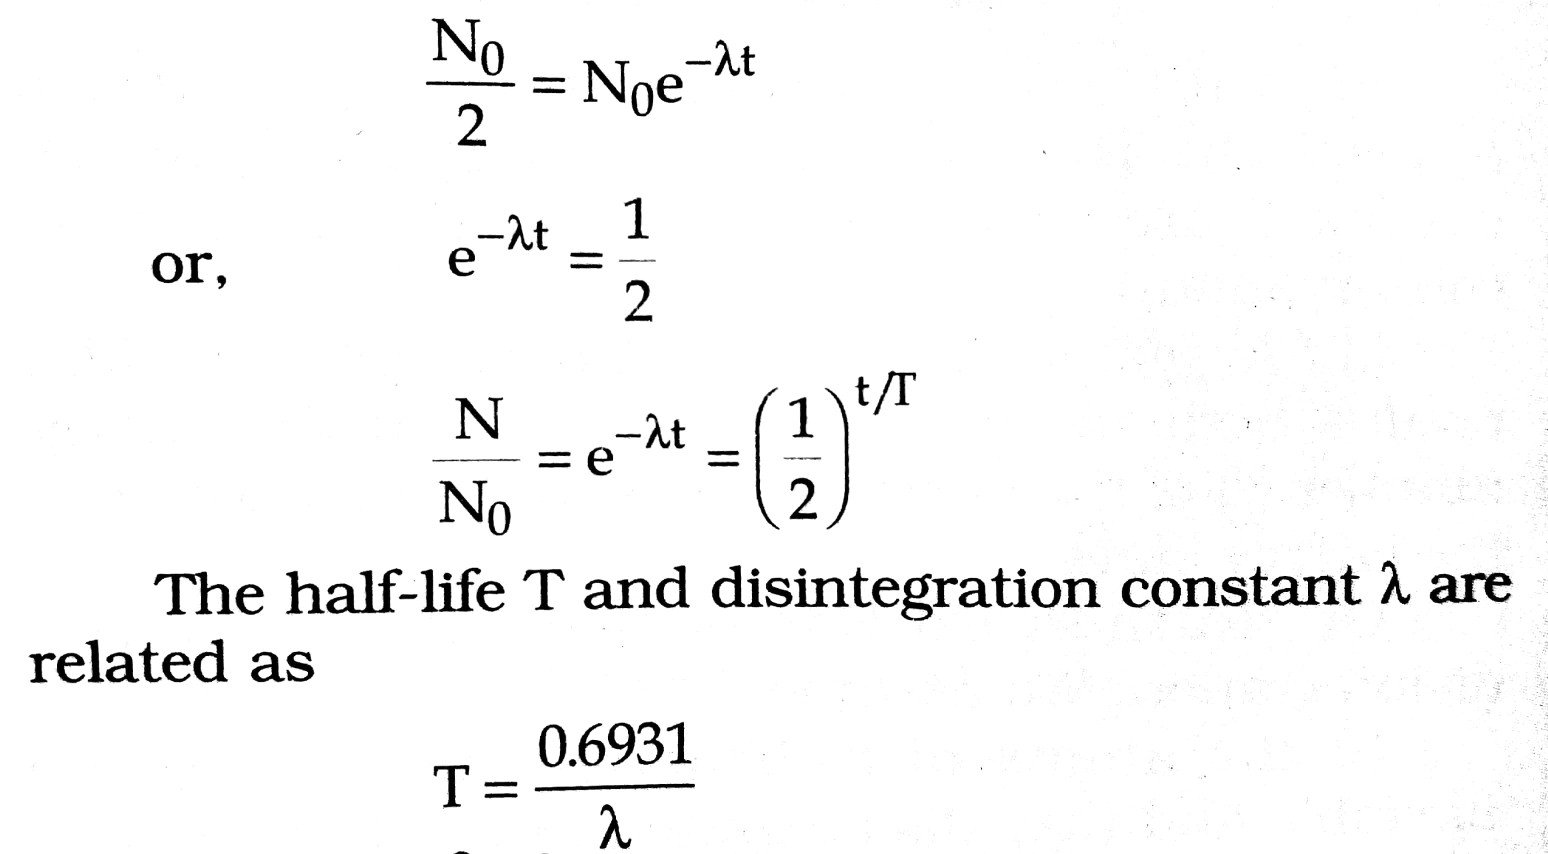 What is the relationship between Half life and Decay constant